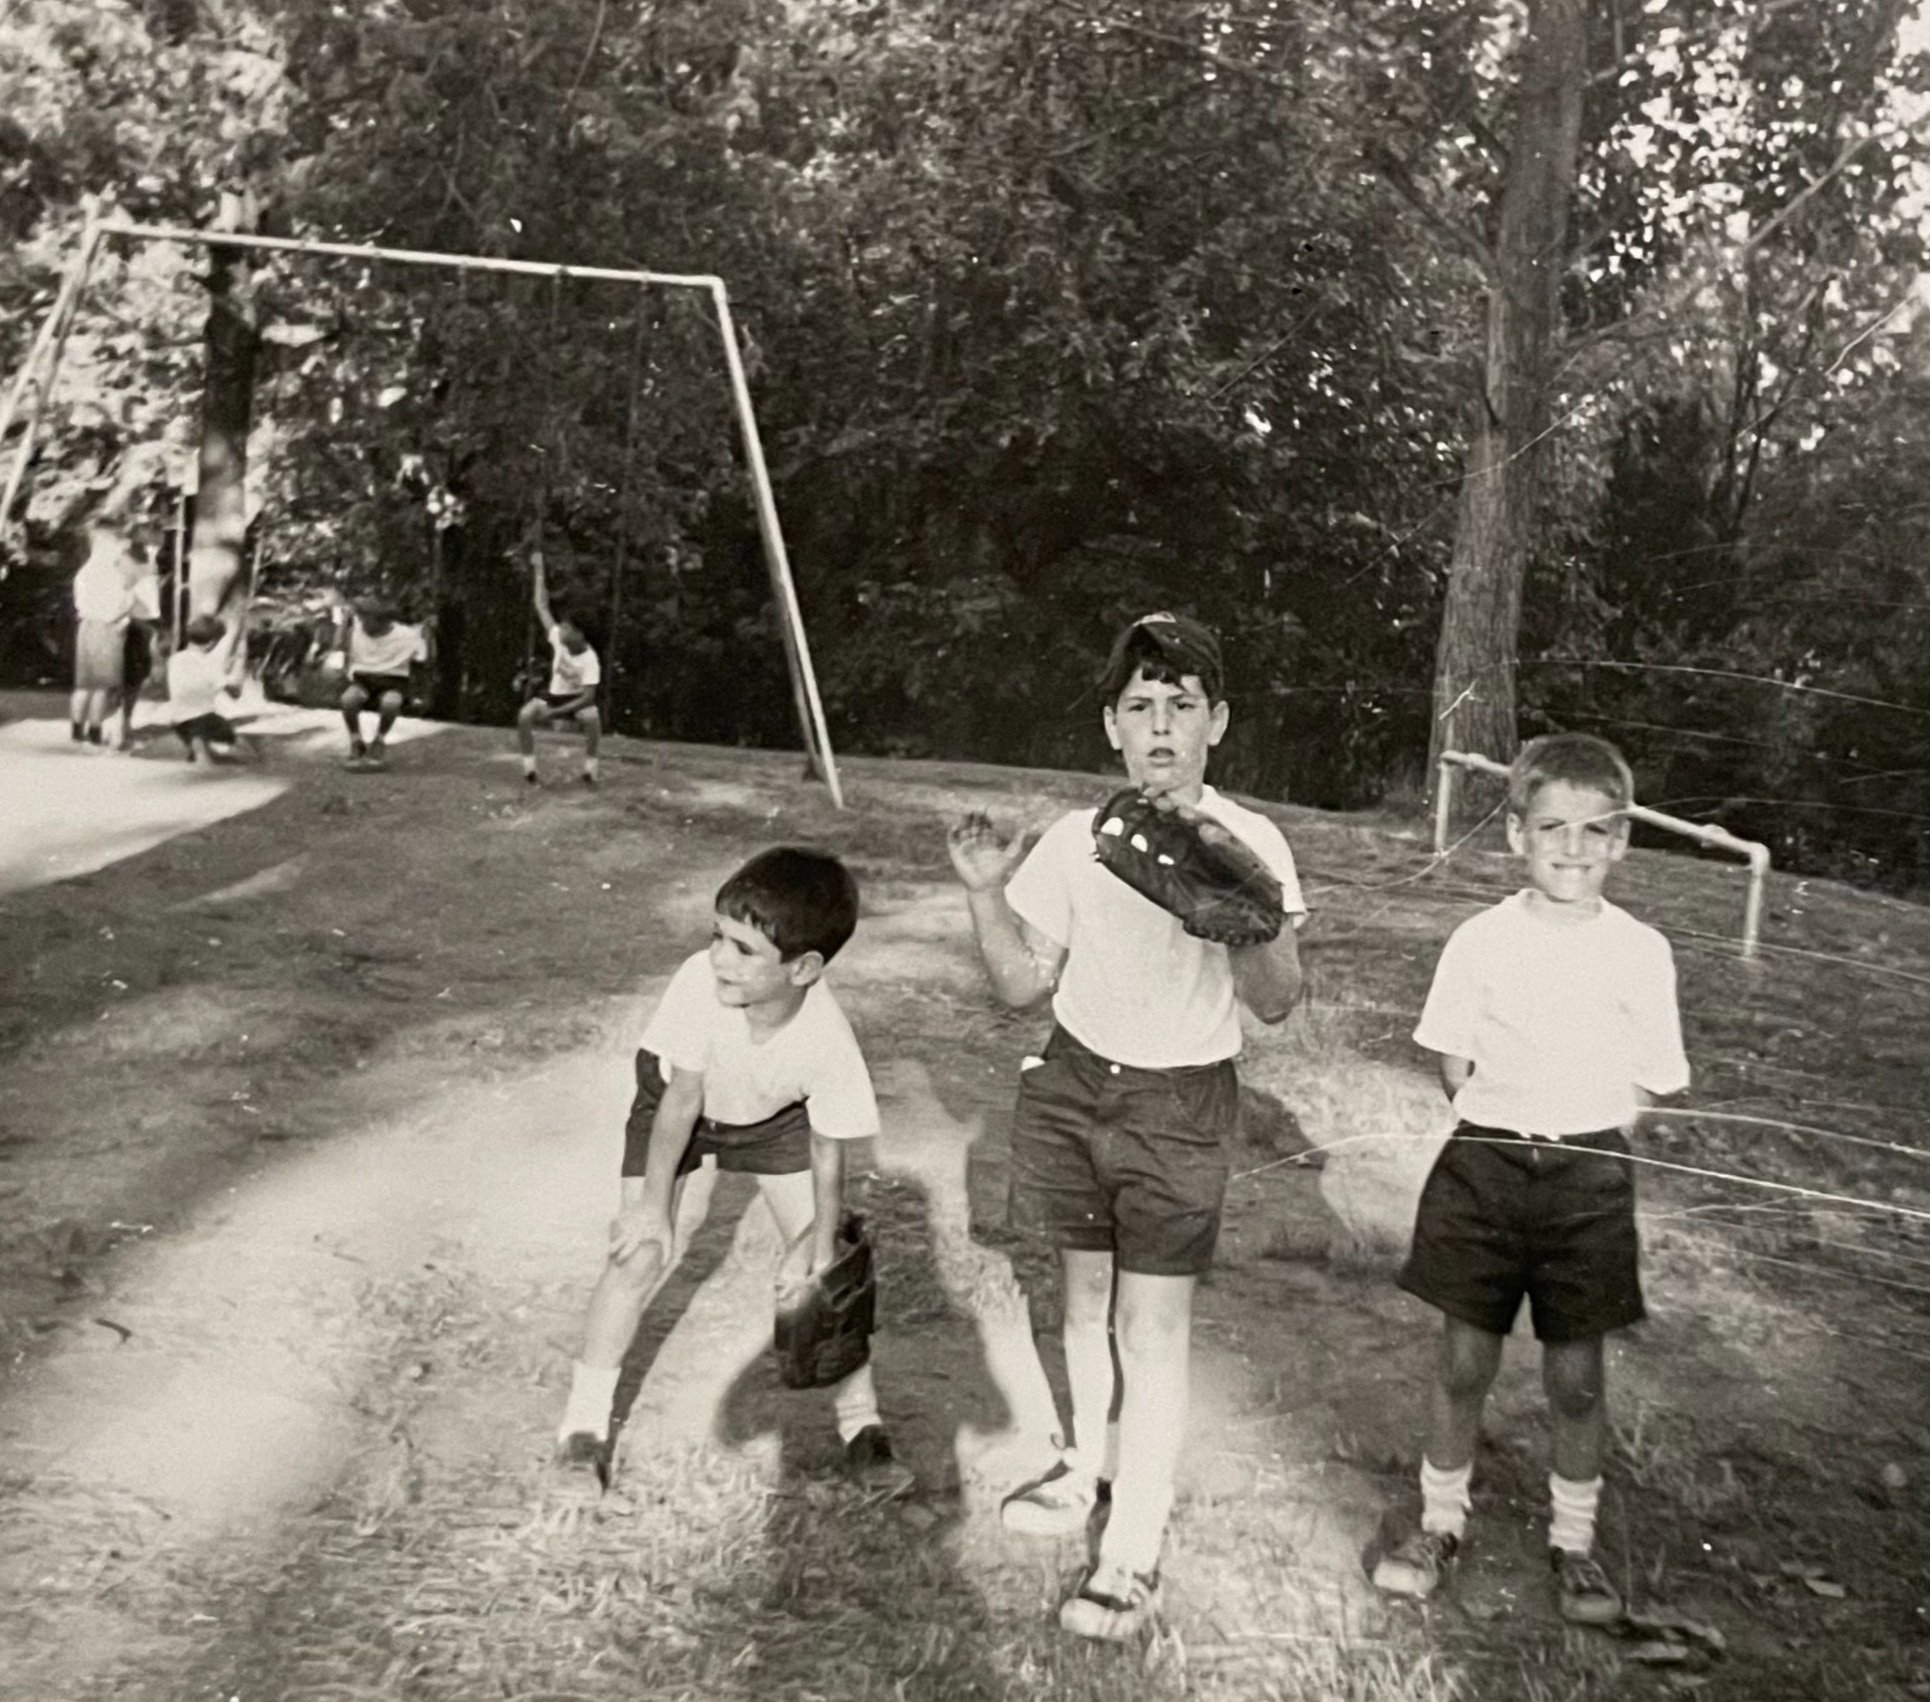  Vintage 1966—from Ricky Shorin: Hanging out on the lower hill with Richie Berger, Jim Shorin, and Jeff Friedman. Maybe the last summer for the swing set behind bunk 1-2? 